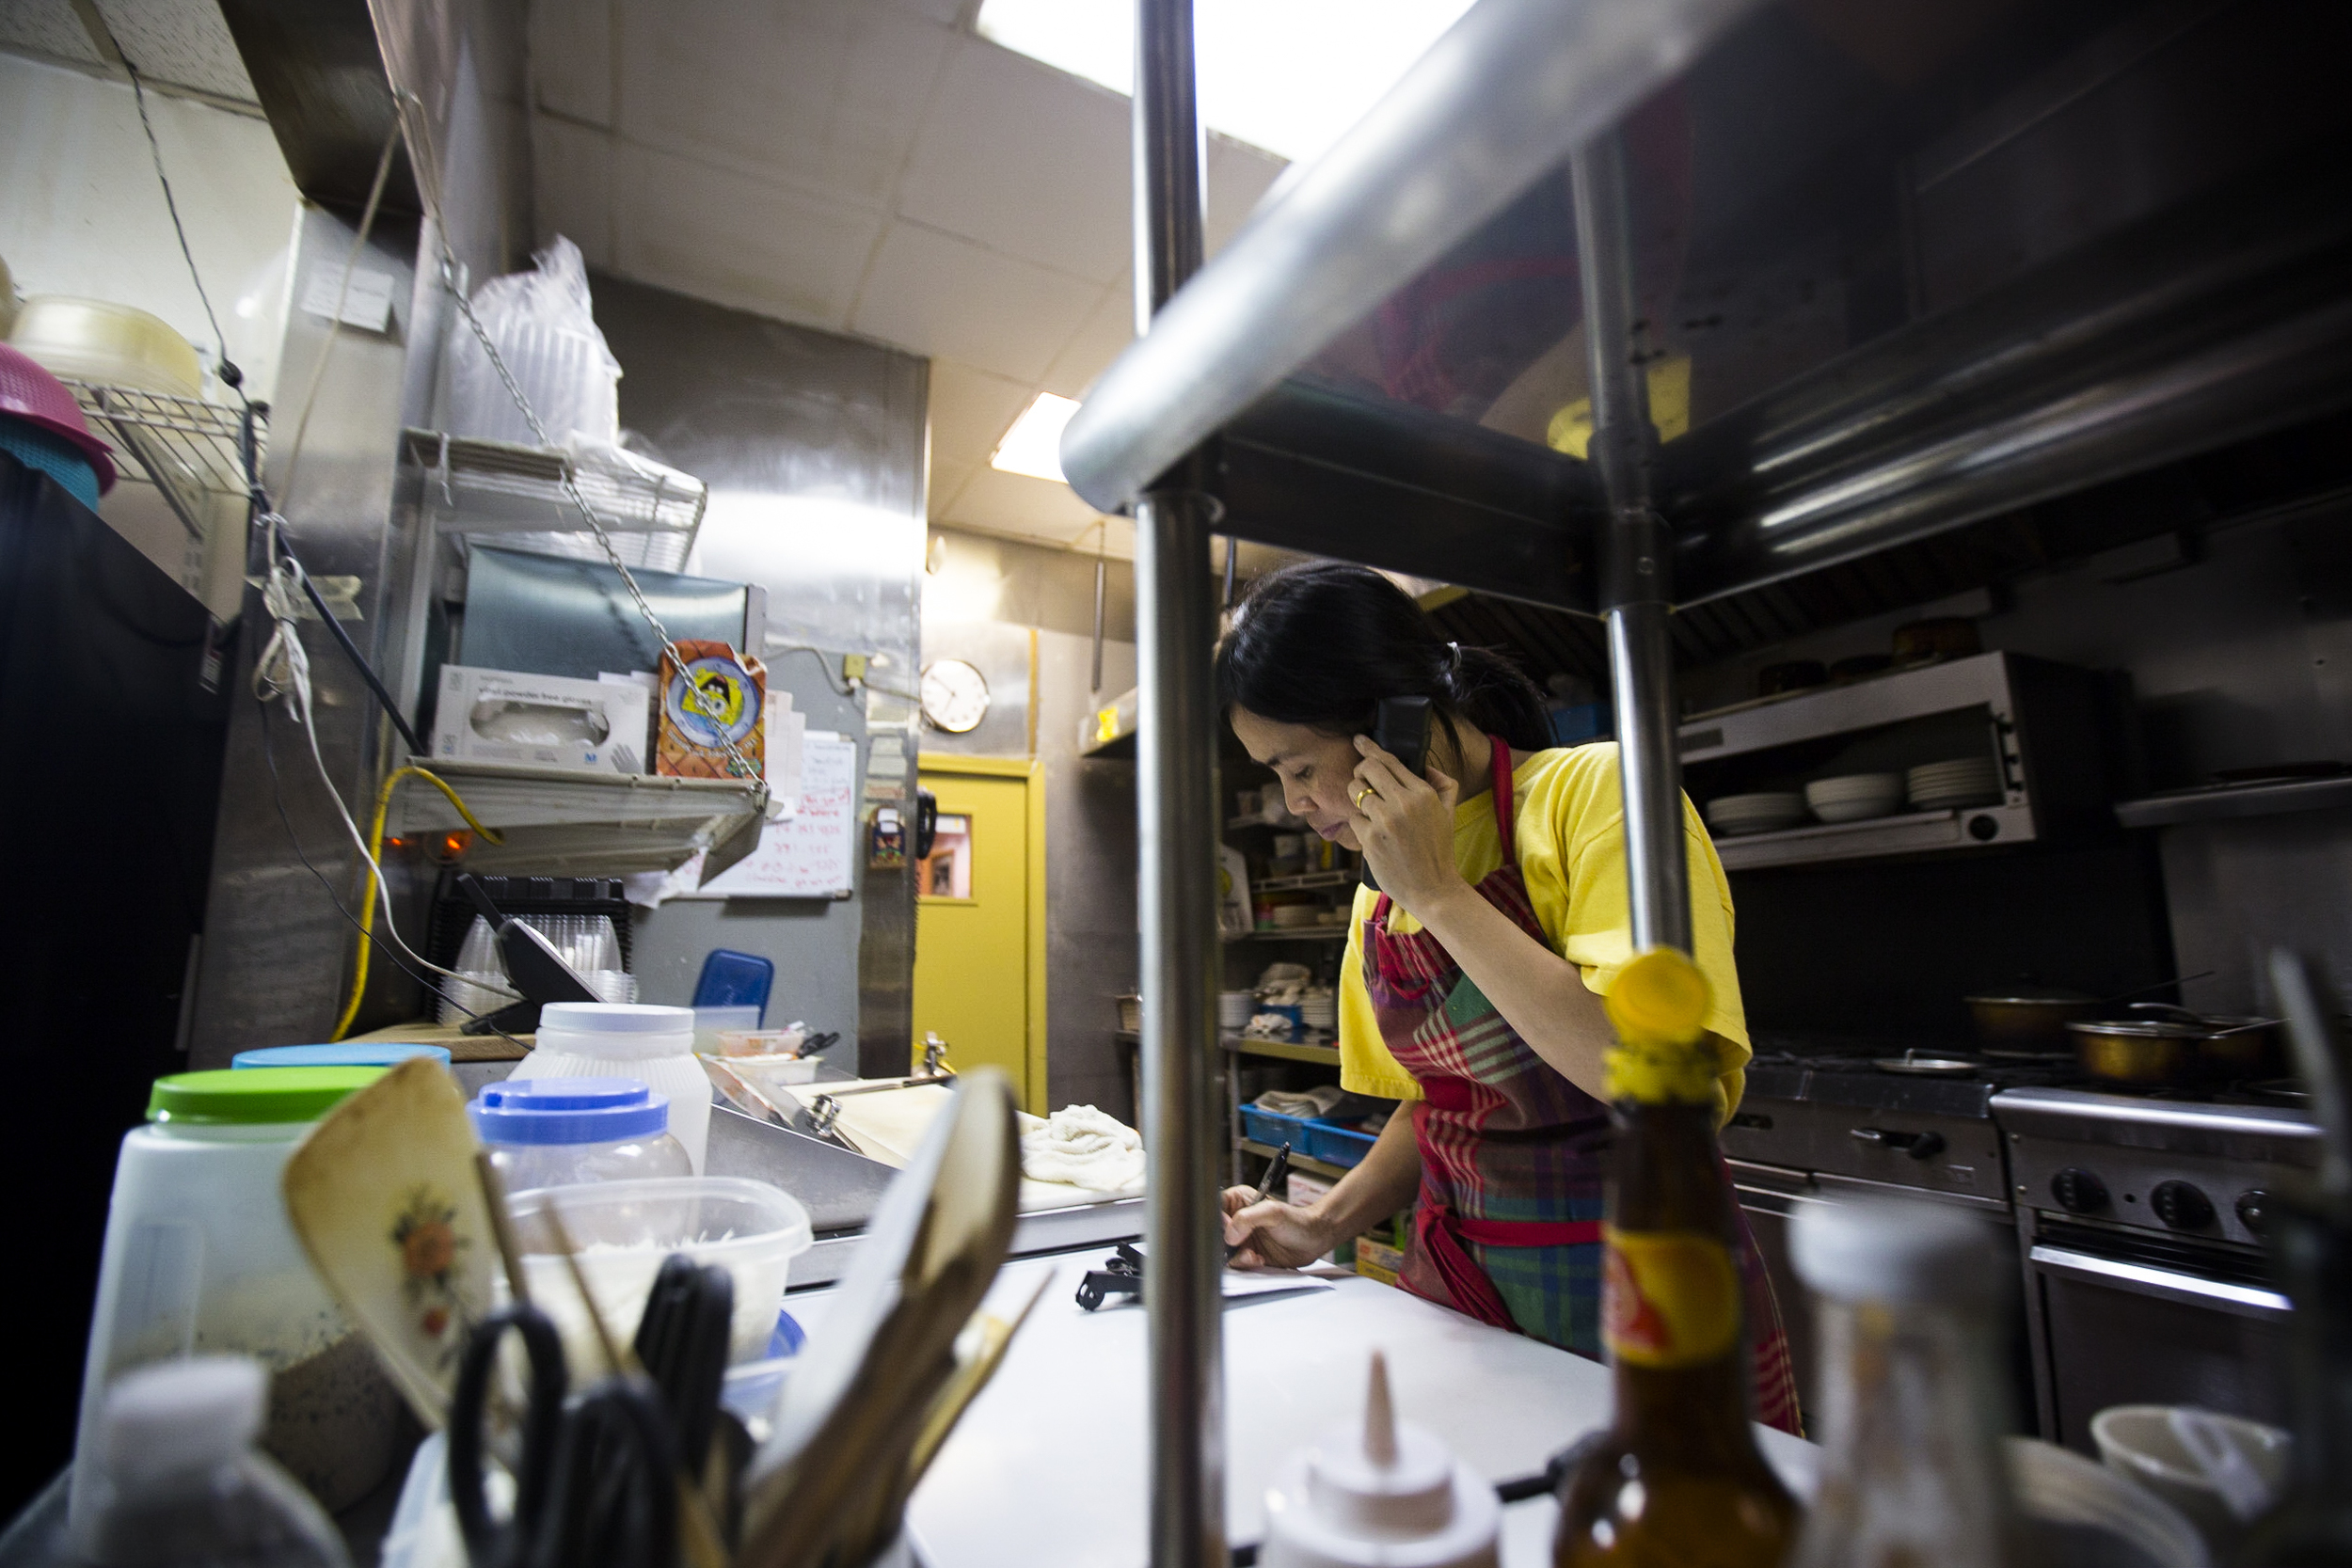  Thawdar Kway, the wife of Yoma's owner. Due to visa problems, she was separated with her husband for almost a year, waiting alone for the visa to be processes in Bangkok, Thailand. Now she helps out in kitchen of Yoma. By Ann Wang 